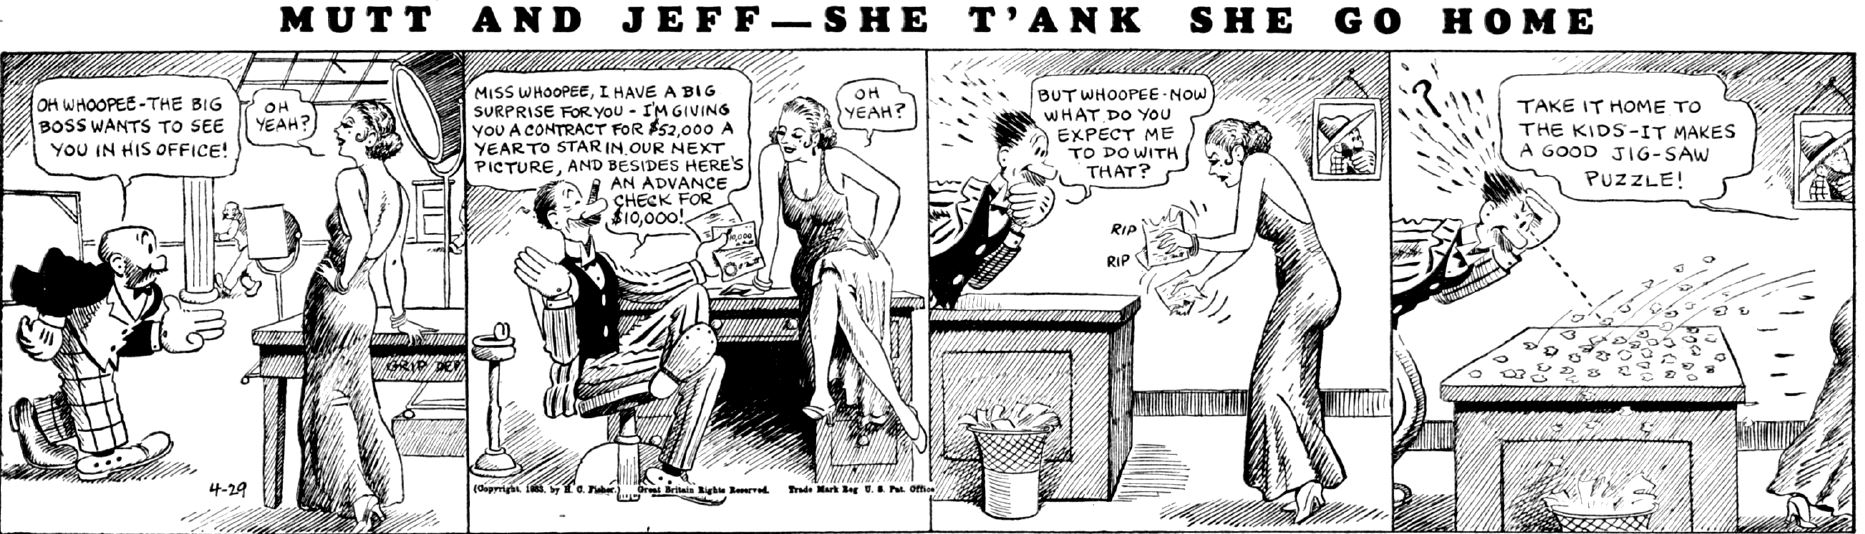 best of Mutt of Comic jeff strip and